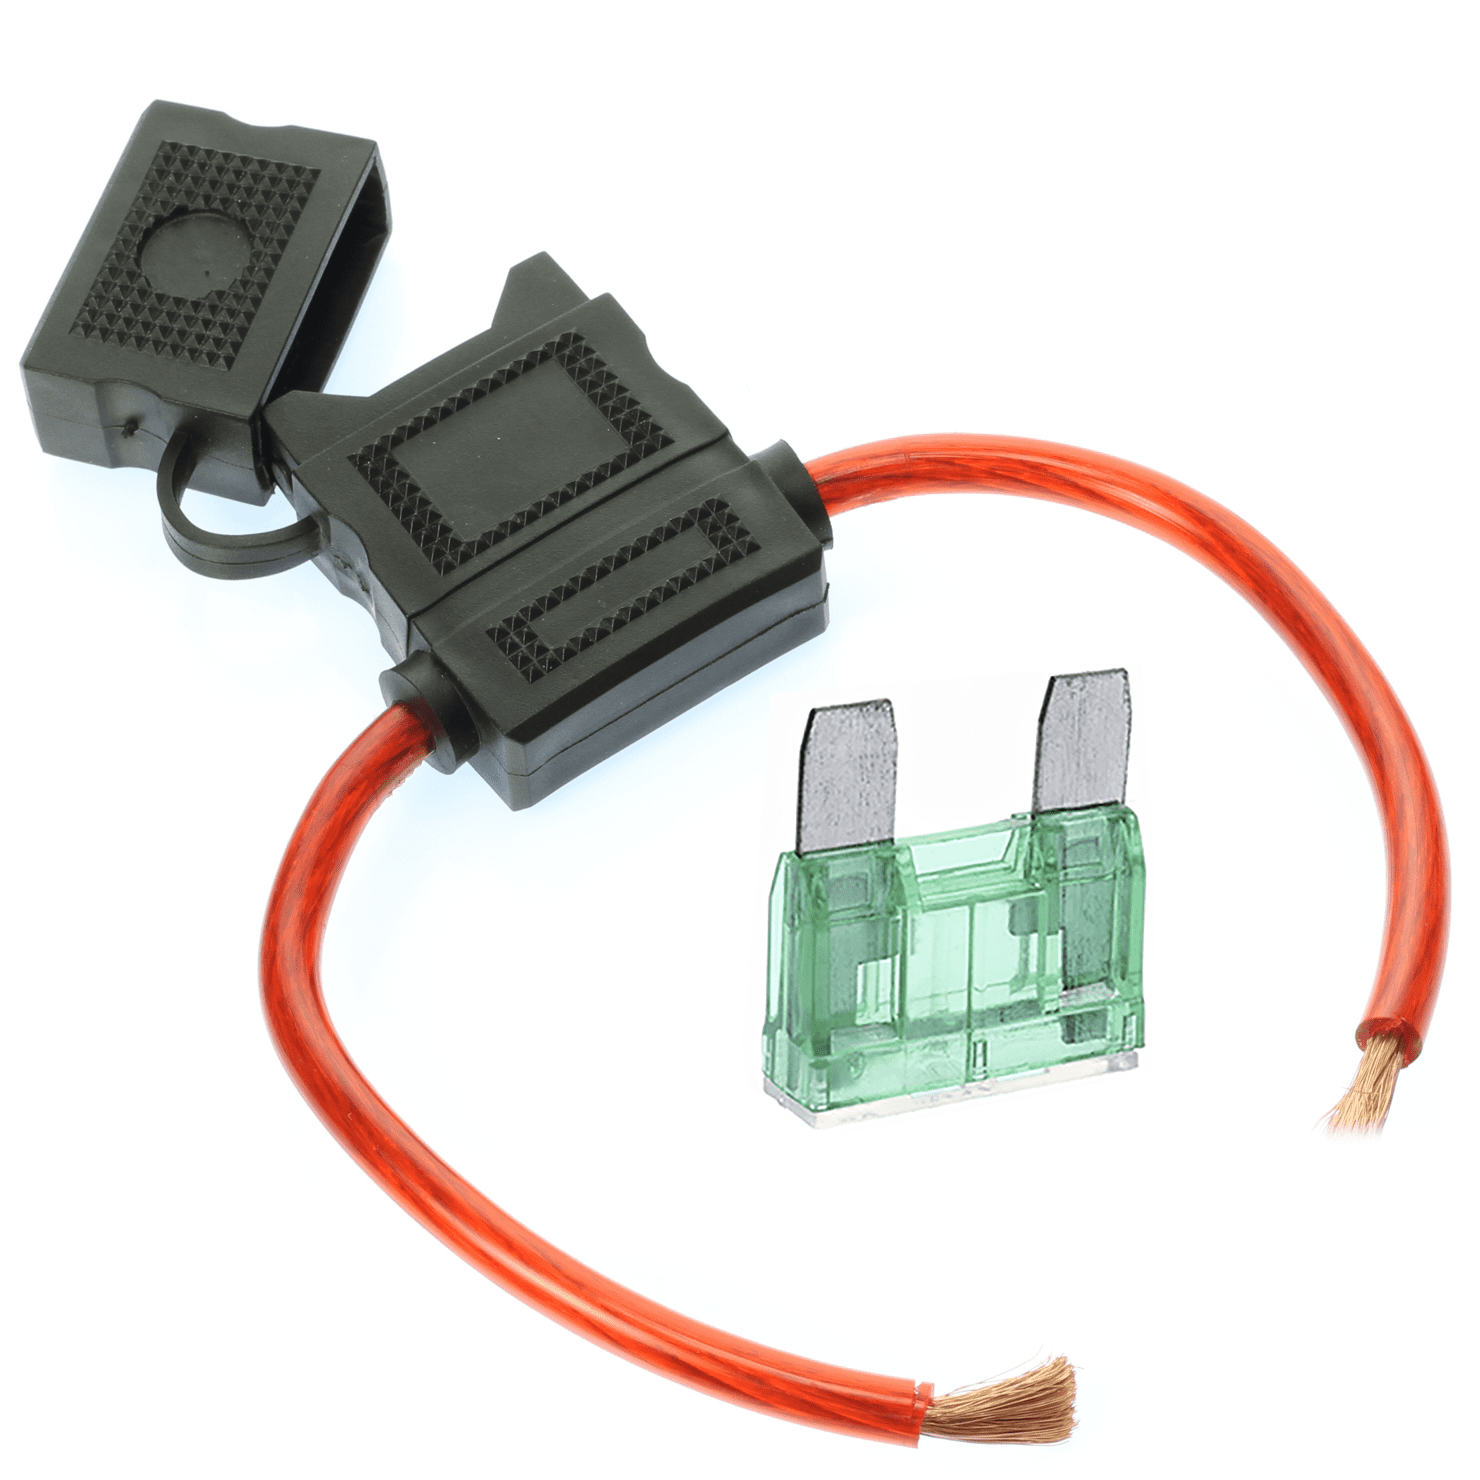 Neuftech Car Auto Fuse Holder Fuses Blade 30A Amp Waterproof